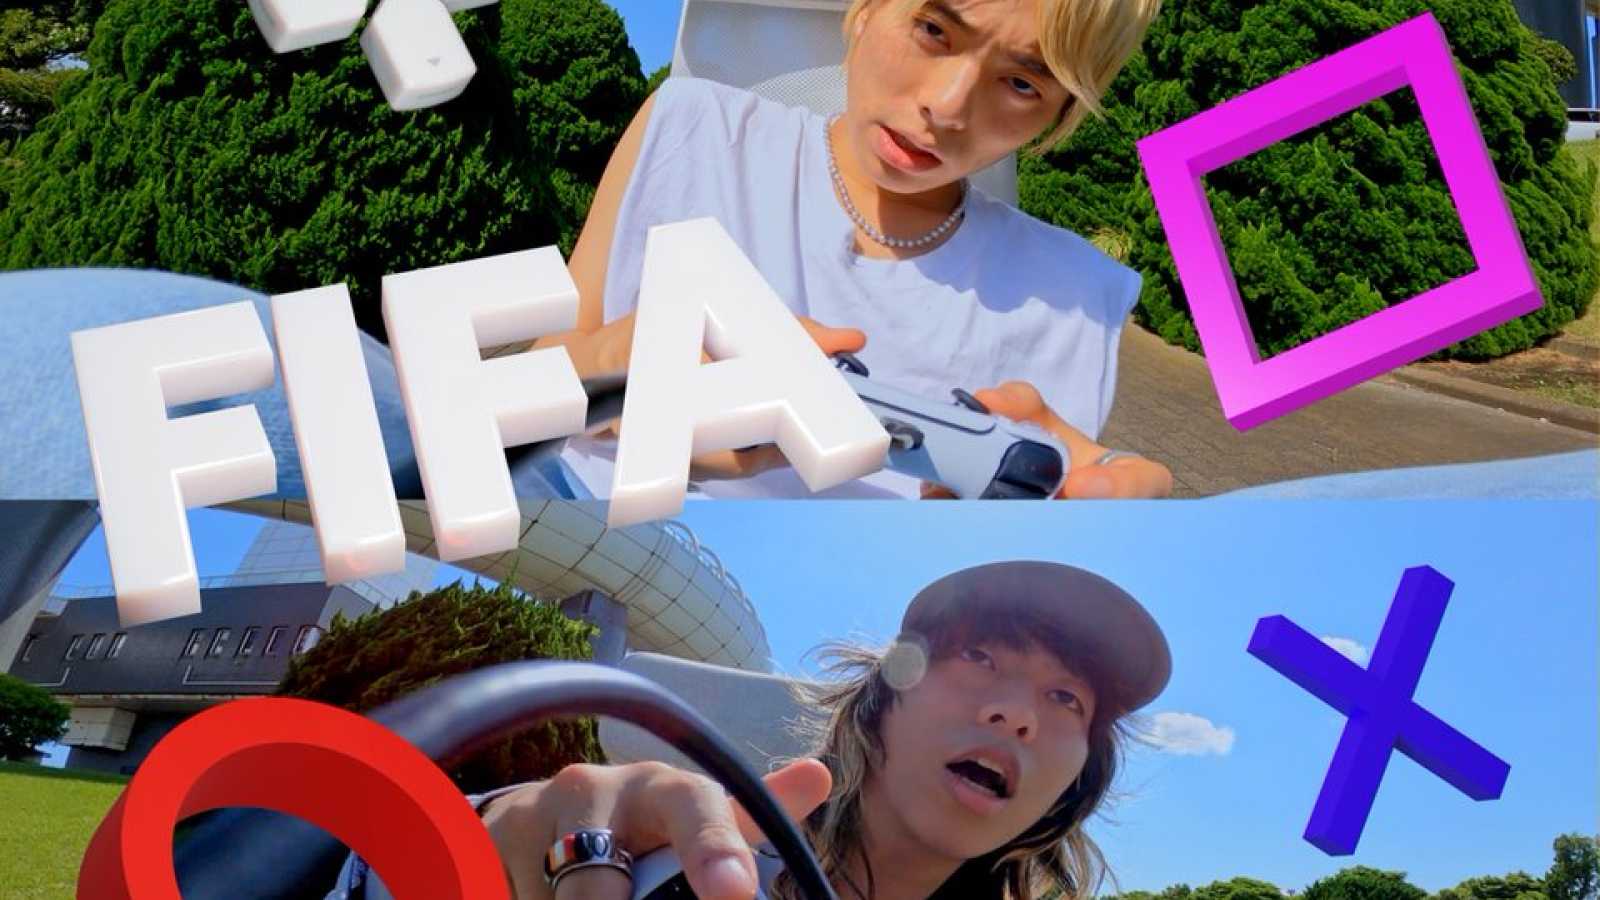 SATOH Unveil "FIFA" Music Video Featuring Only U © SATOH. All rights reserved.